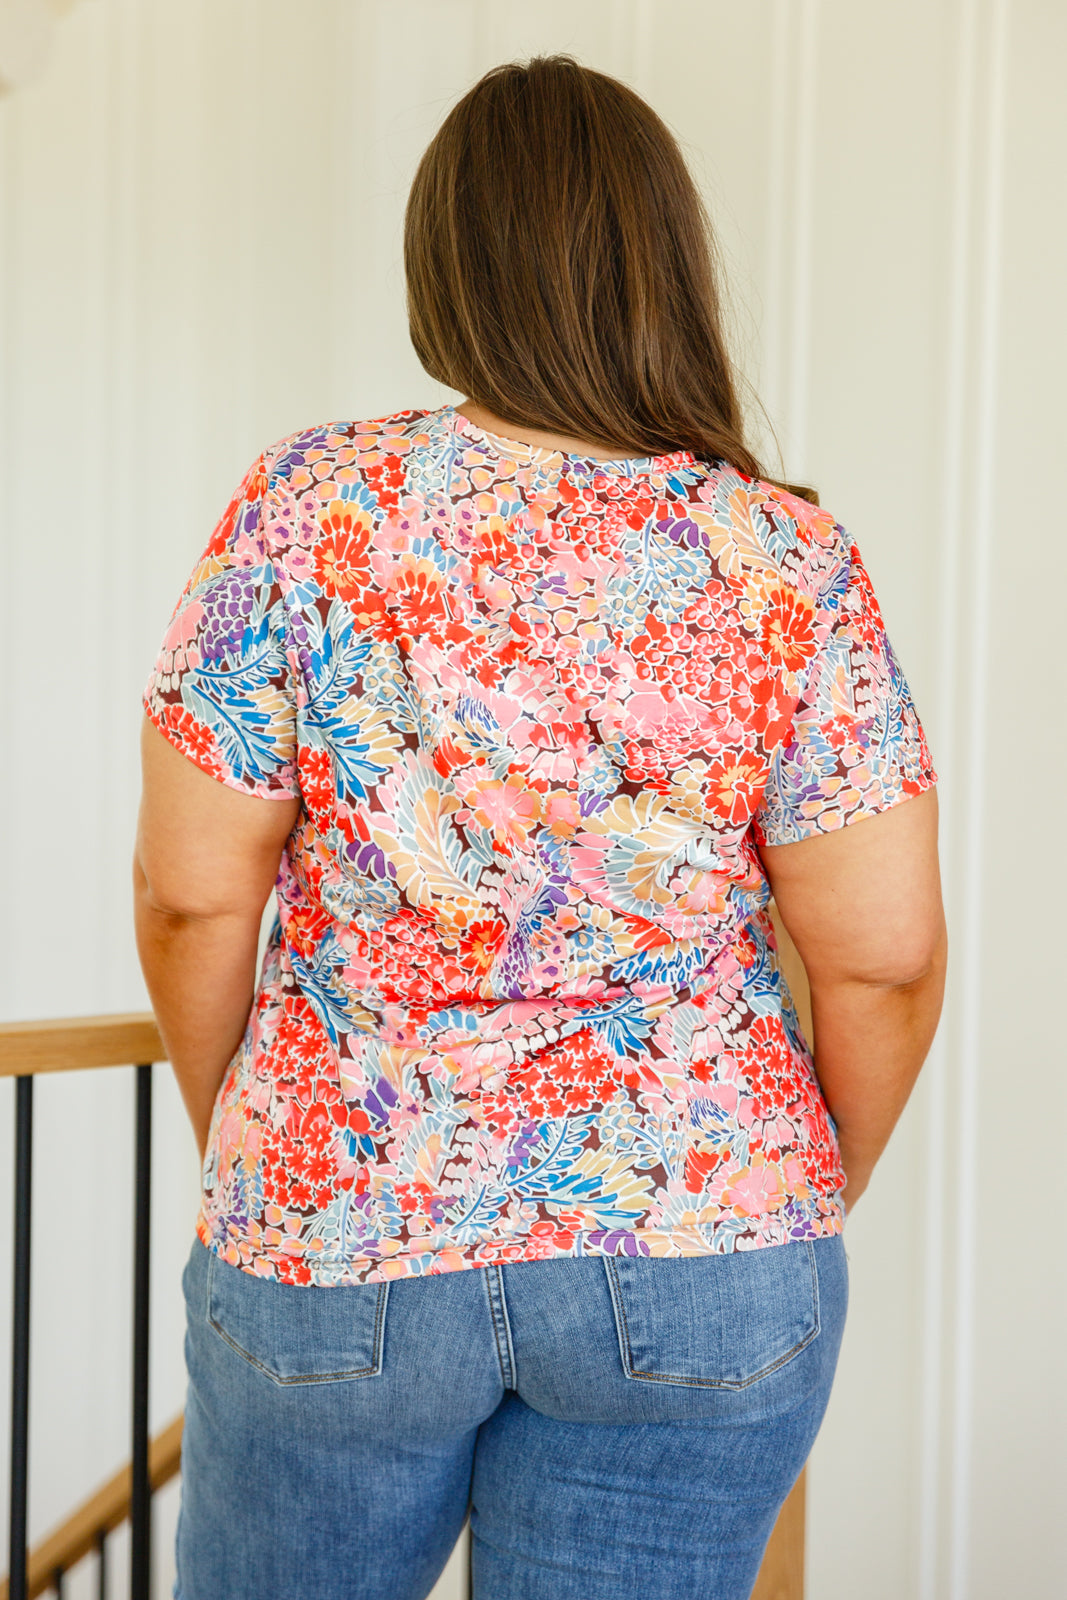 Flowers Everywhere Floral Top-100 Short Sleeve Tops-Inspired by Justeen-Women's Clothing Boutique in Chicago, Illinois